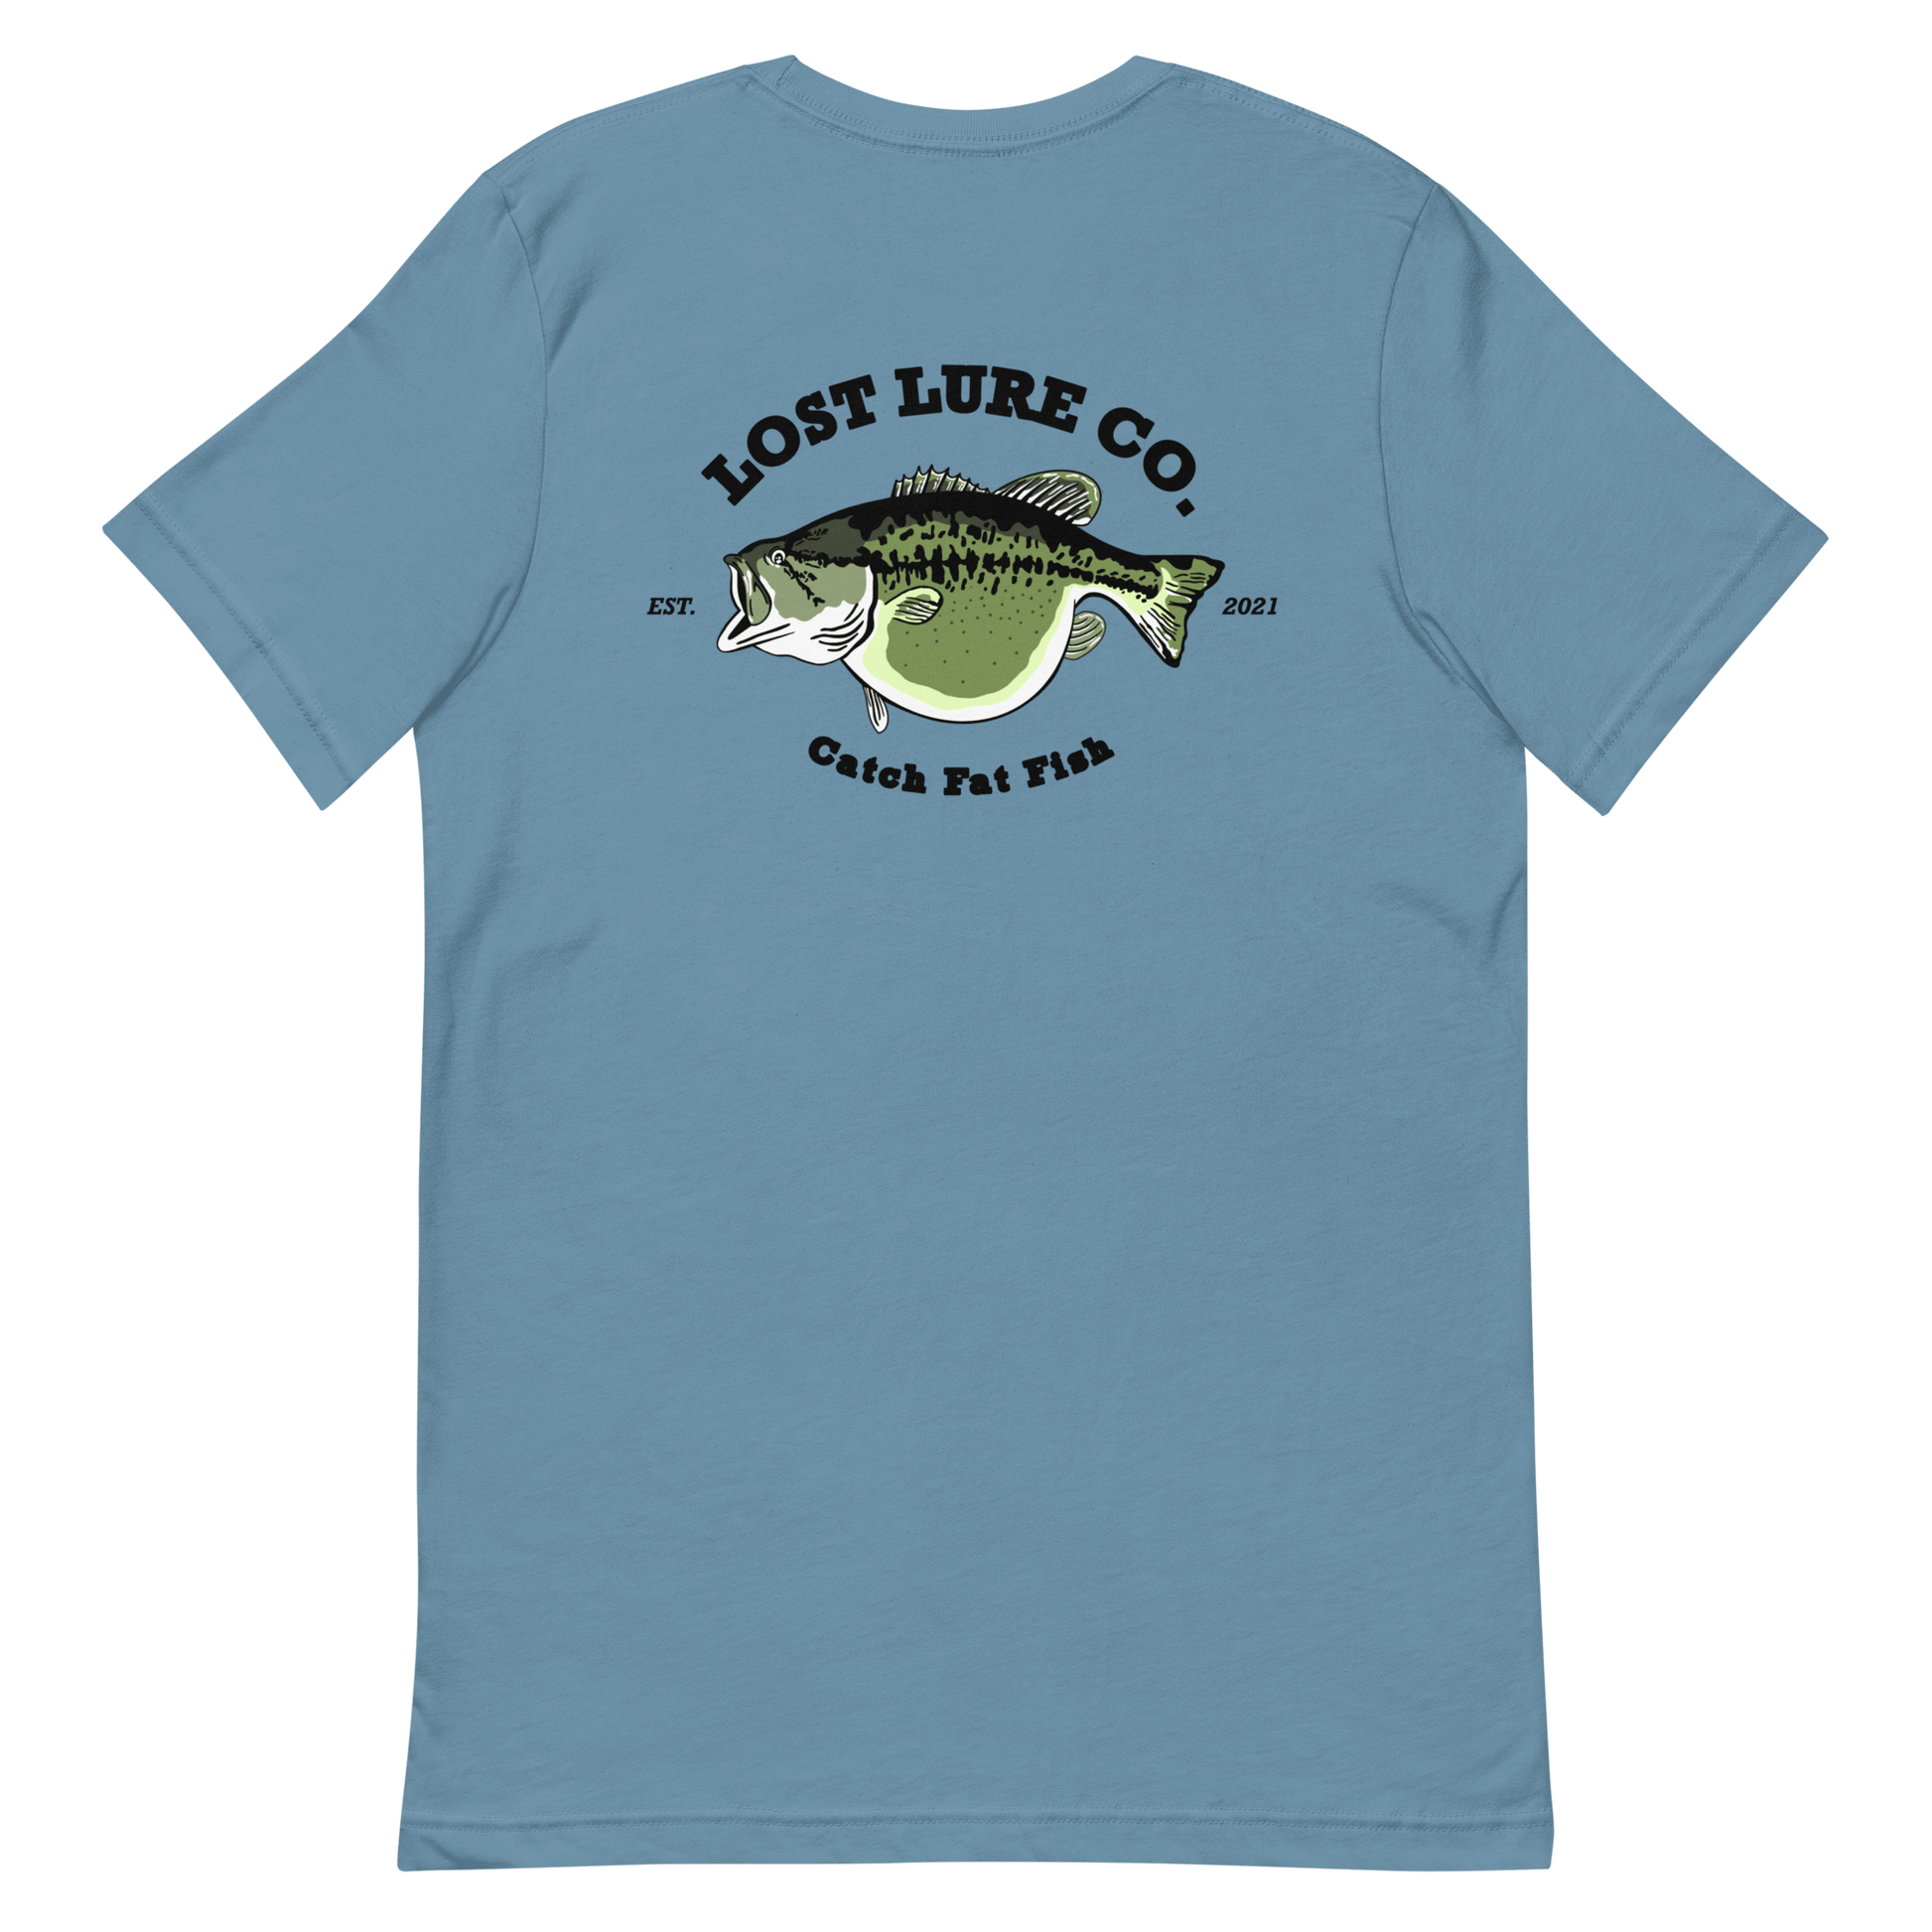 Bass fishing shirt. It has a drawing of a fat bass and it reads “lost lure co, catch fat fish”. The bass design is on the back, the lost lure logo is on the front. Steel blue shirt, back side 